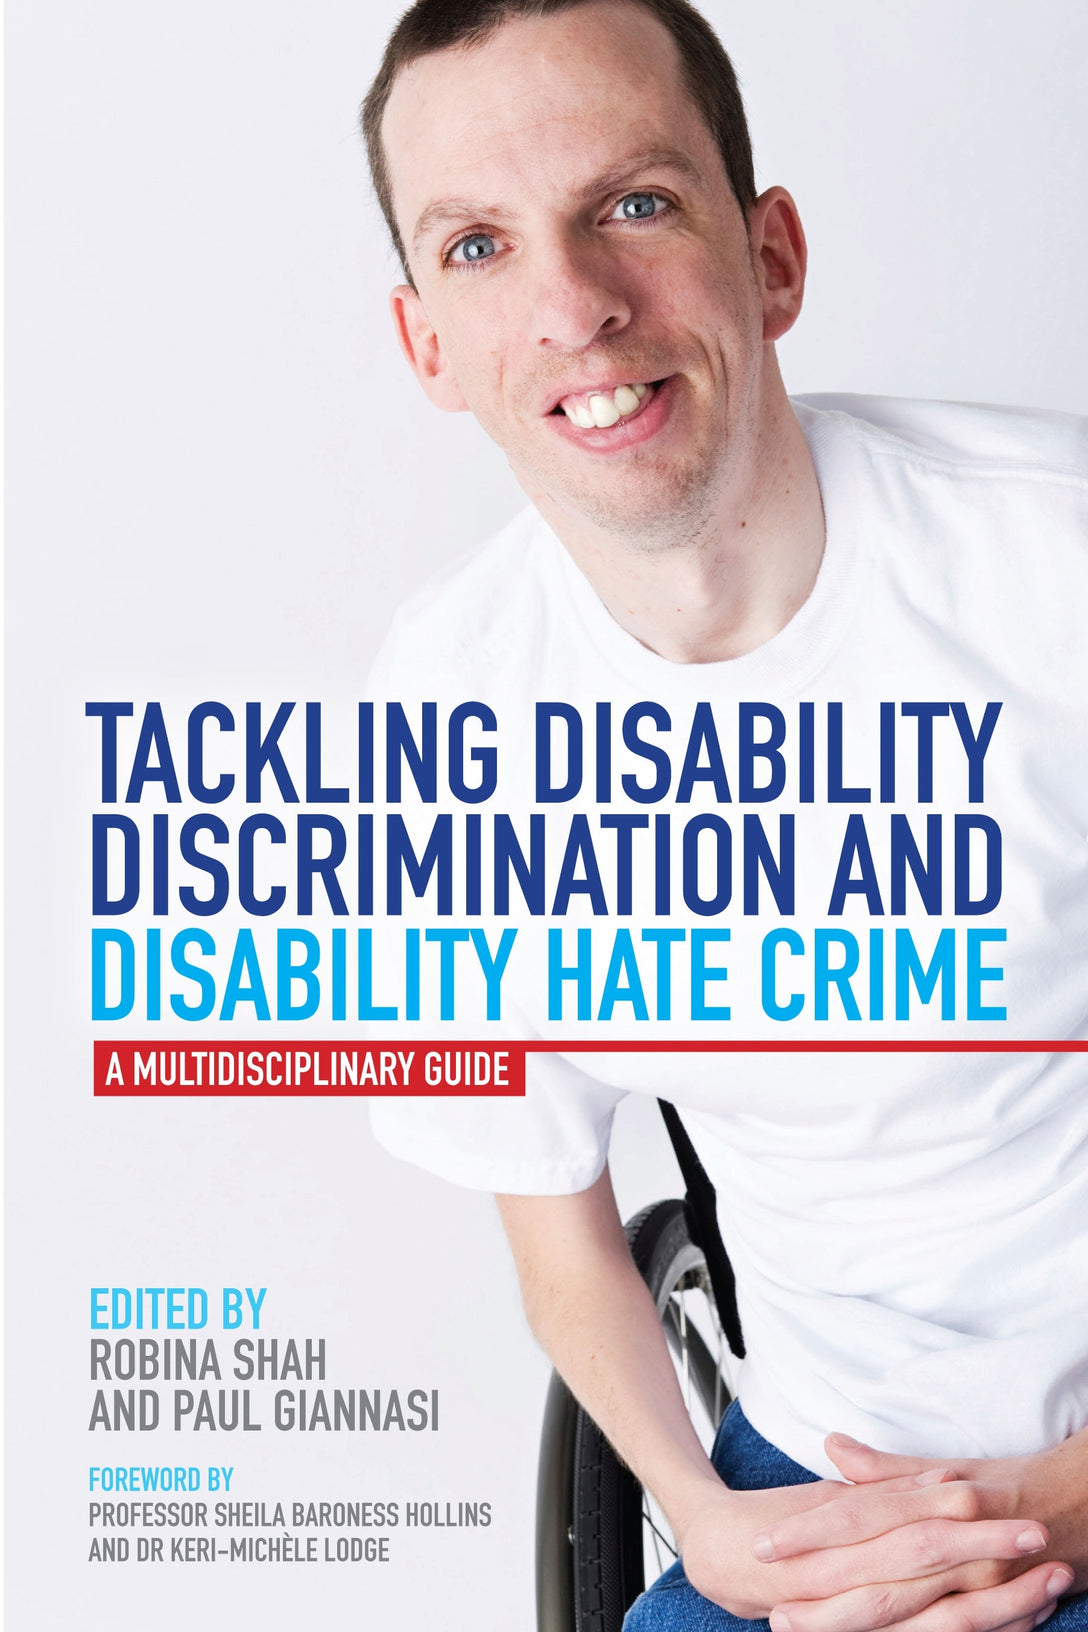 Tackling Disability Discrimination and Disability Hate Crime by Robina Shah, Paul Giannasi, Sheila Hollins